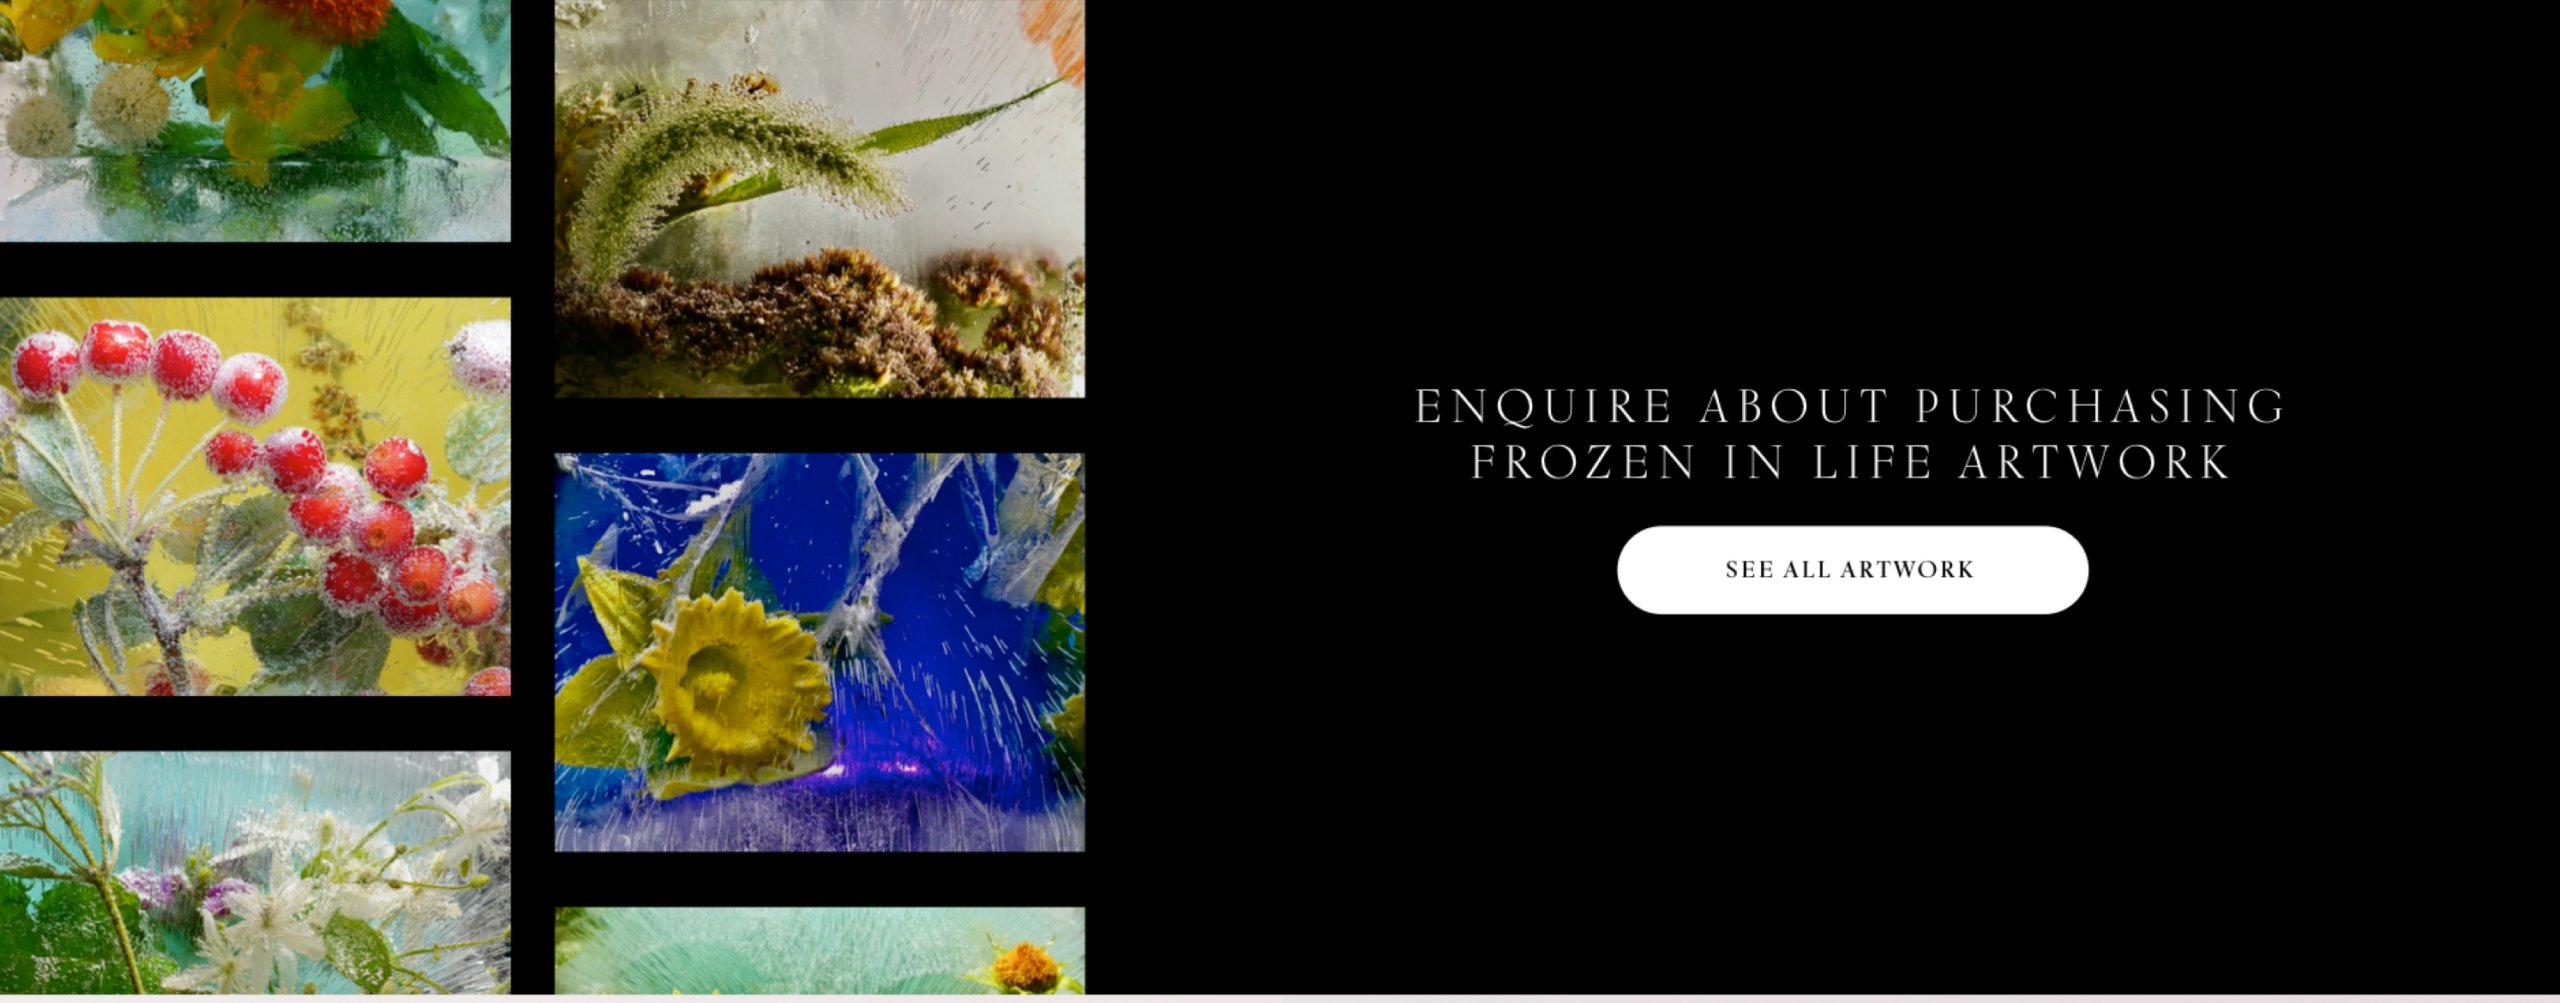 Two columns of rows of pictures of Anna’s work feature on the left-hand side of the image of a black background which states “Enquire about purchasing Frozen life artwork” with a white button “See all artwork”.